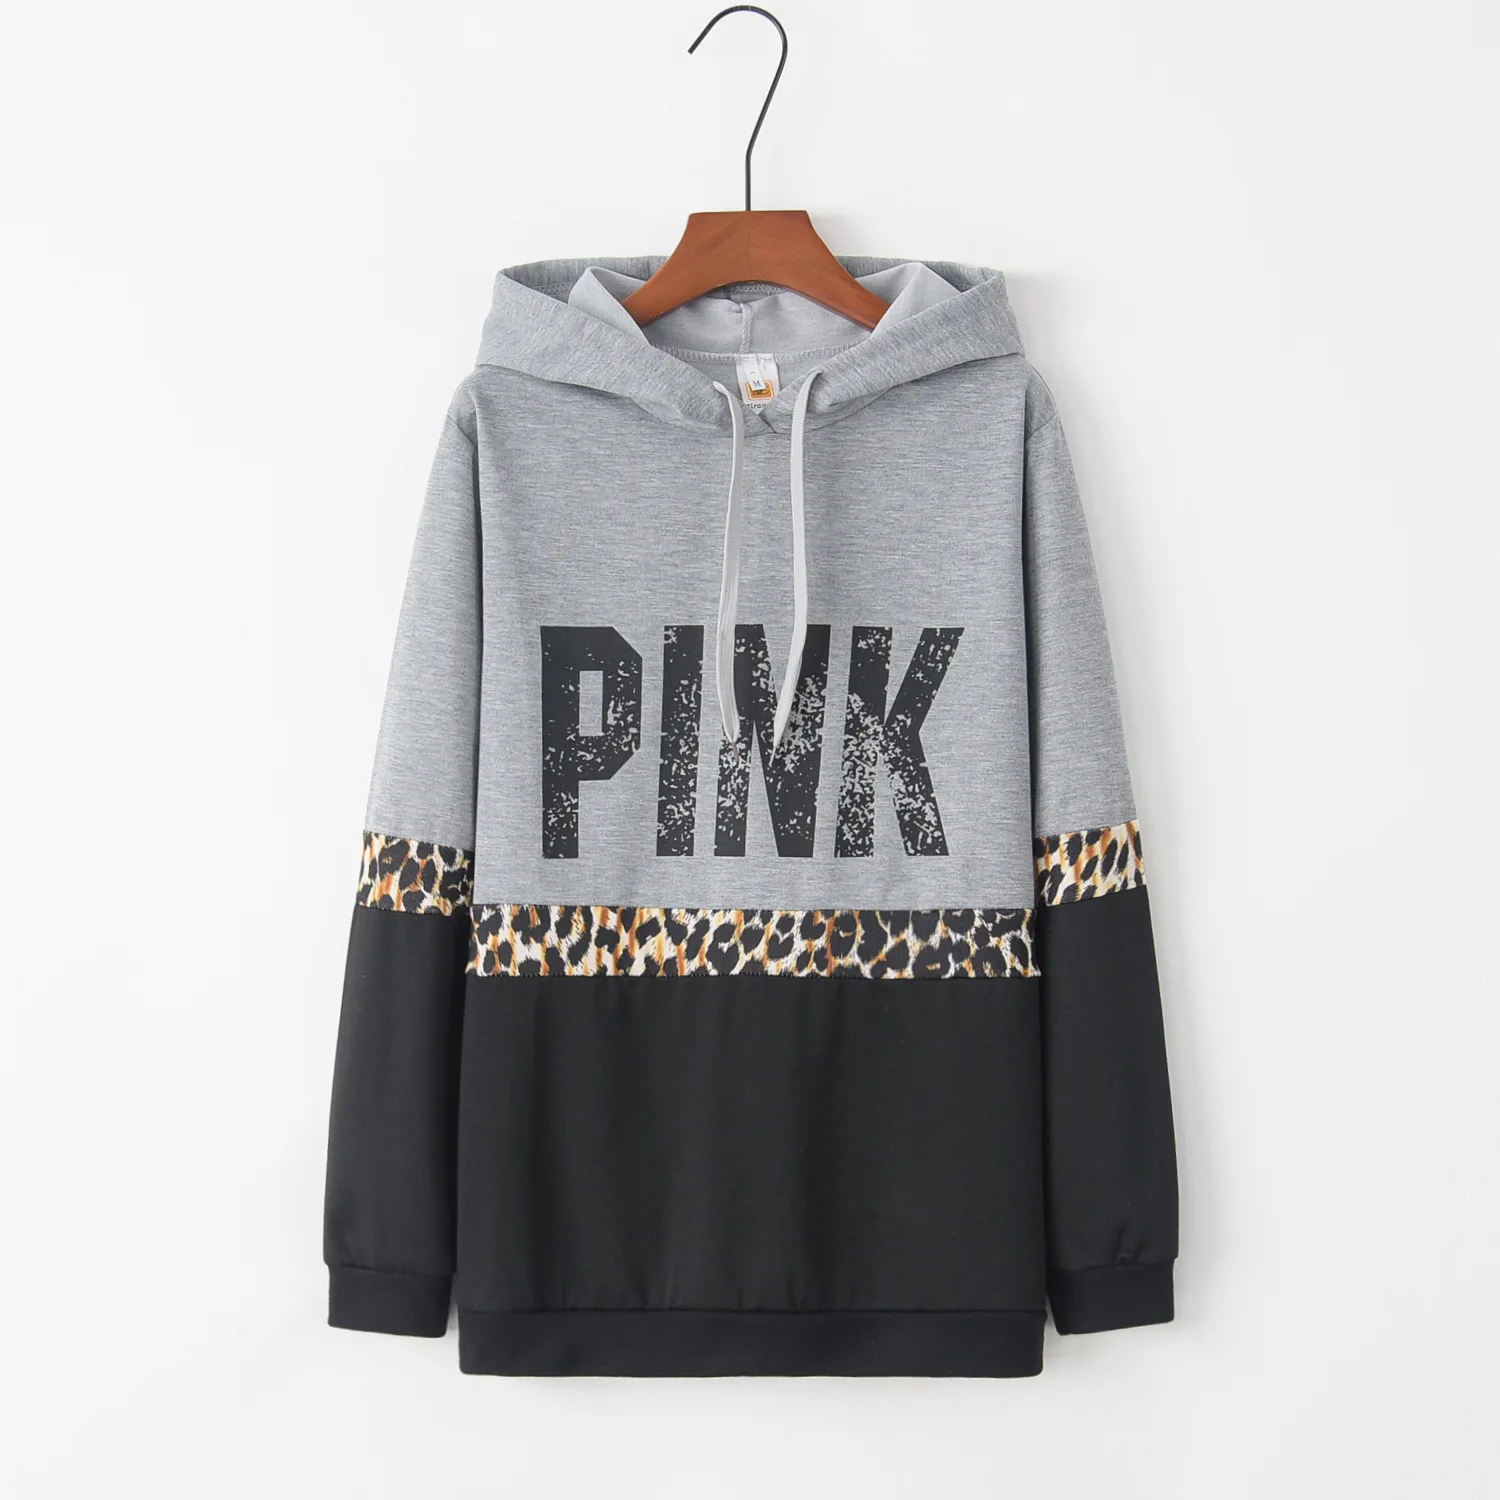 2023 Ladies PINK Letter Print Full Sleeve Hooded Sweatshirt Leopard Print Black Grey Casual Costume New Arrival Cotton Women Top gours winter real leather gloves men black genuine goatskin gloves fleece lining warm soft driving fashion new arrival gsm049